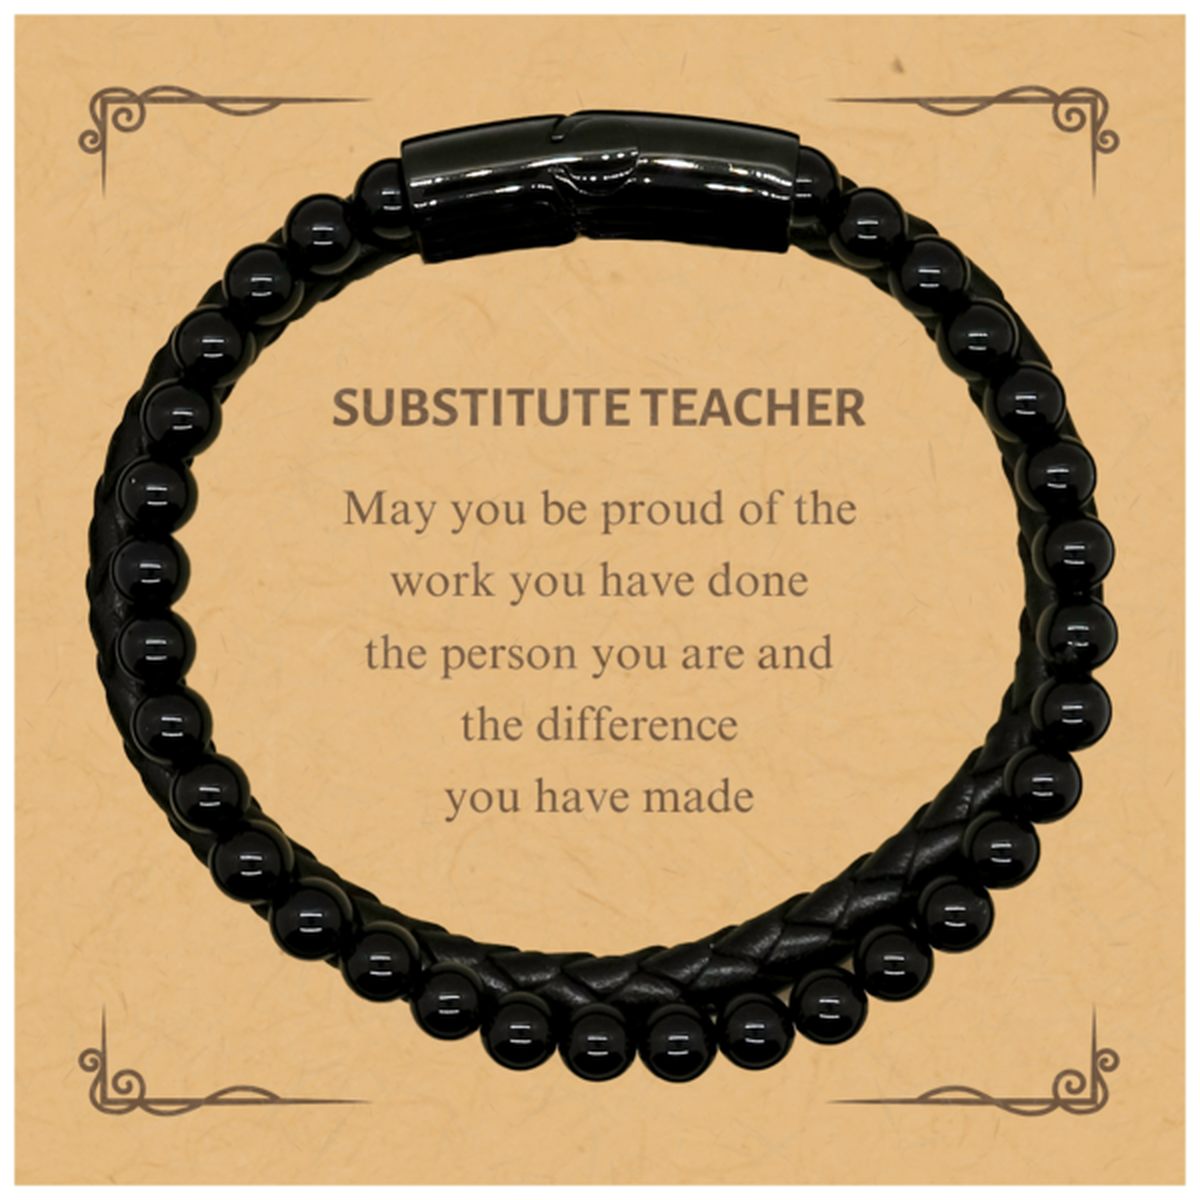 Substitute Teacher May you be proud of the work you have done, Retirement Substitute Teacher Stone Leather Bracelets for Colleague Appreciation Gifts Amazing for Substitute Teacher